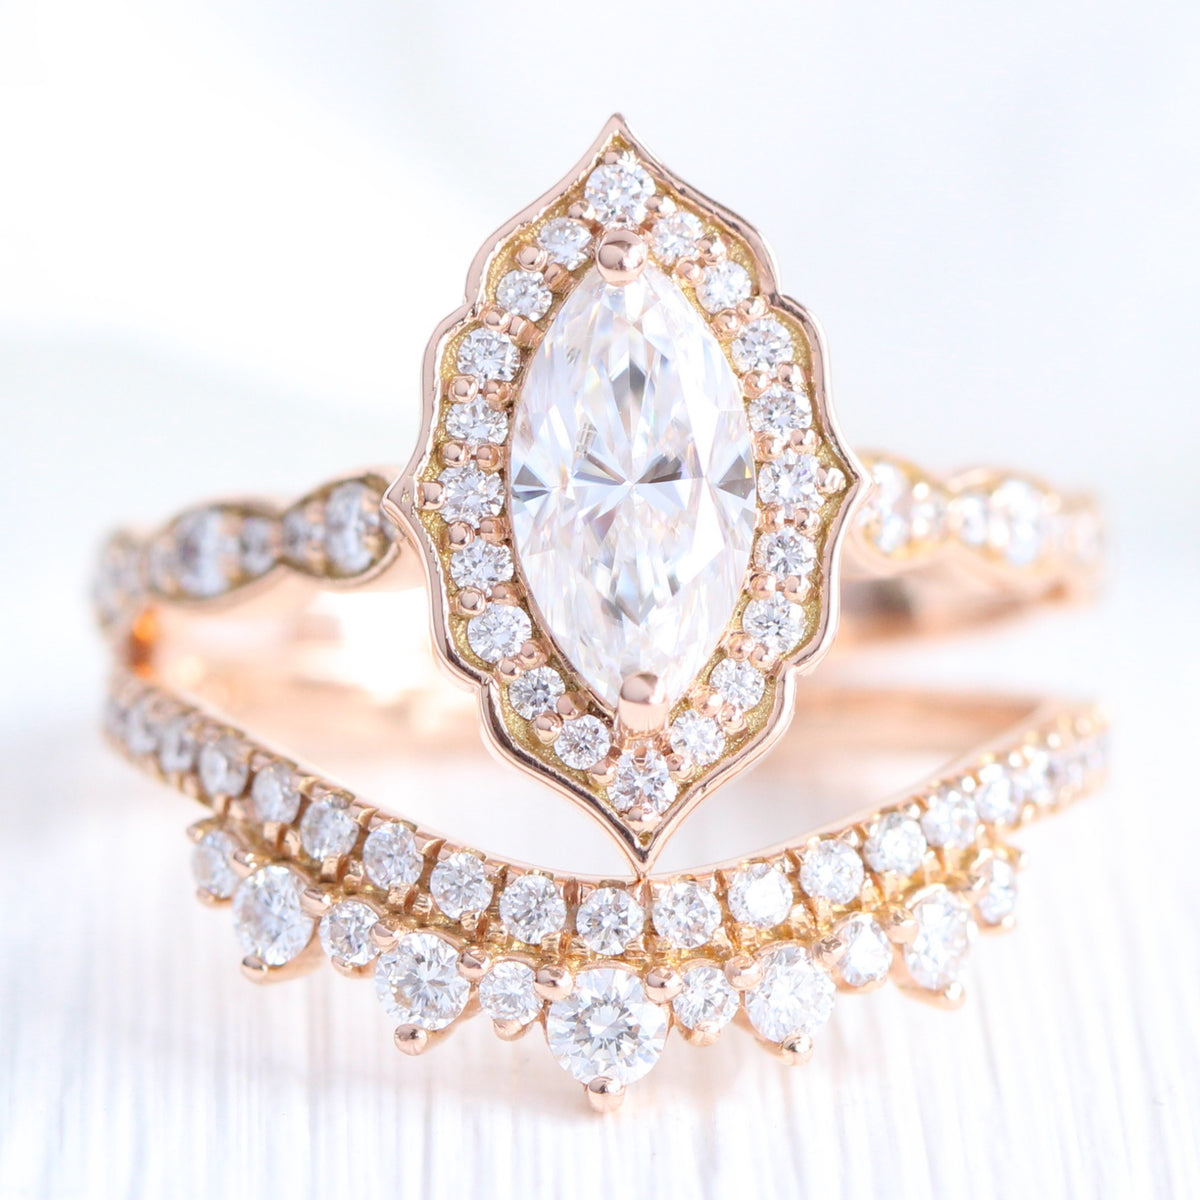 Halo diamond marquise ring rose gold curved crown diamond wedding ring bridal set by la more design jewelry